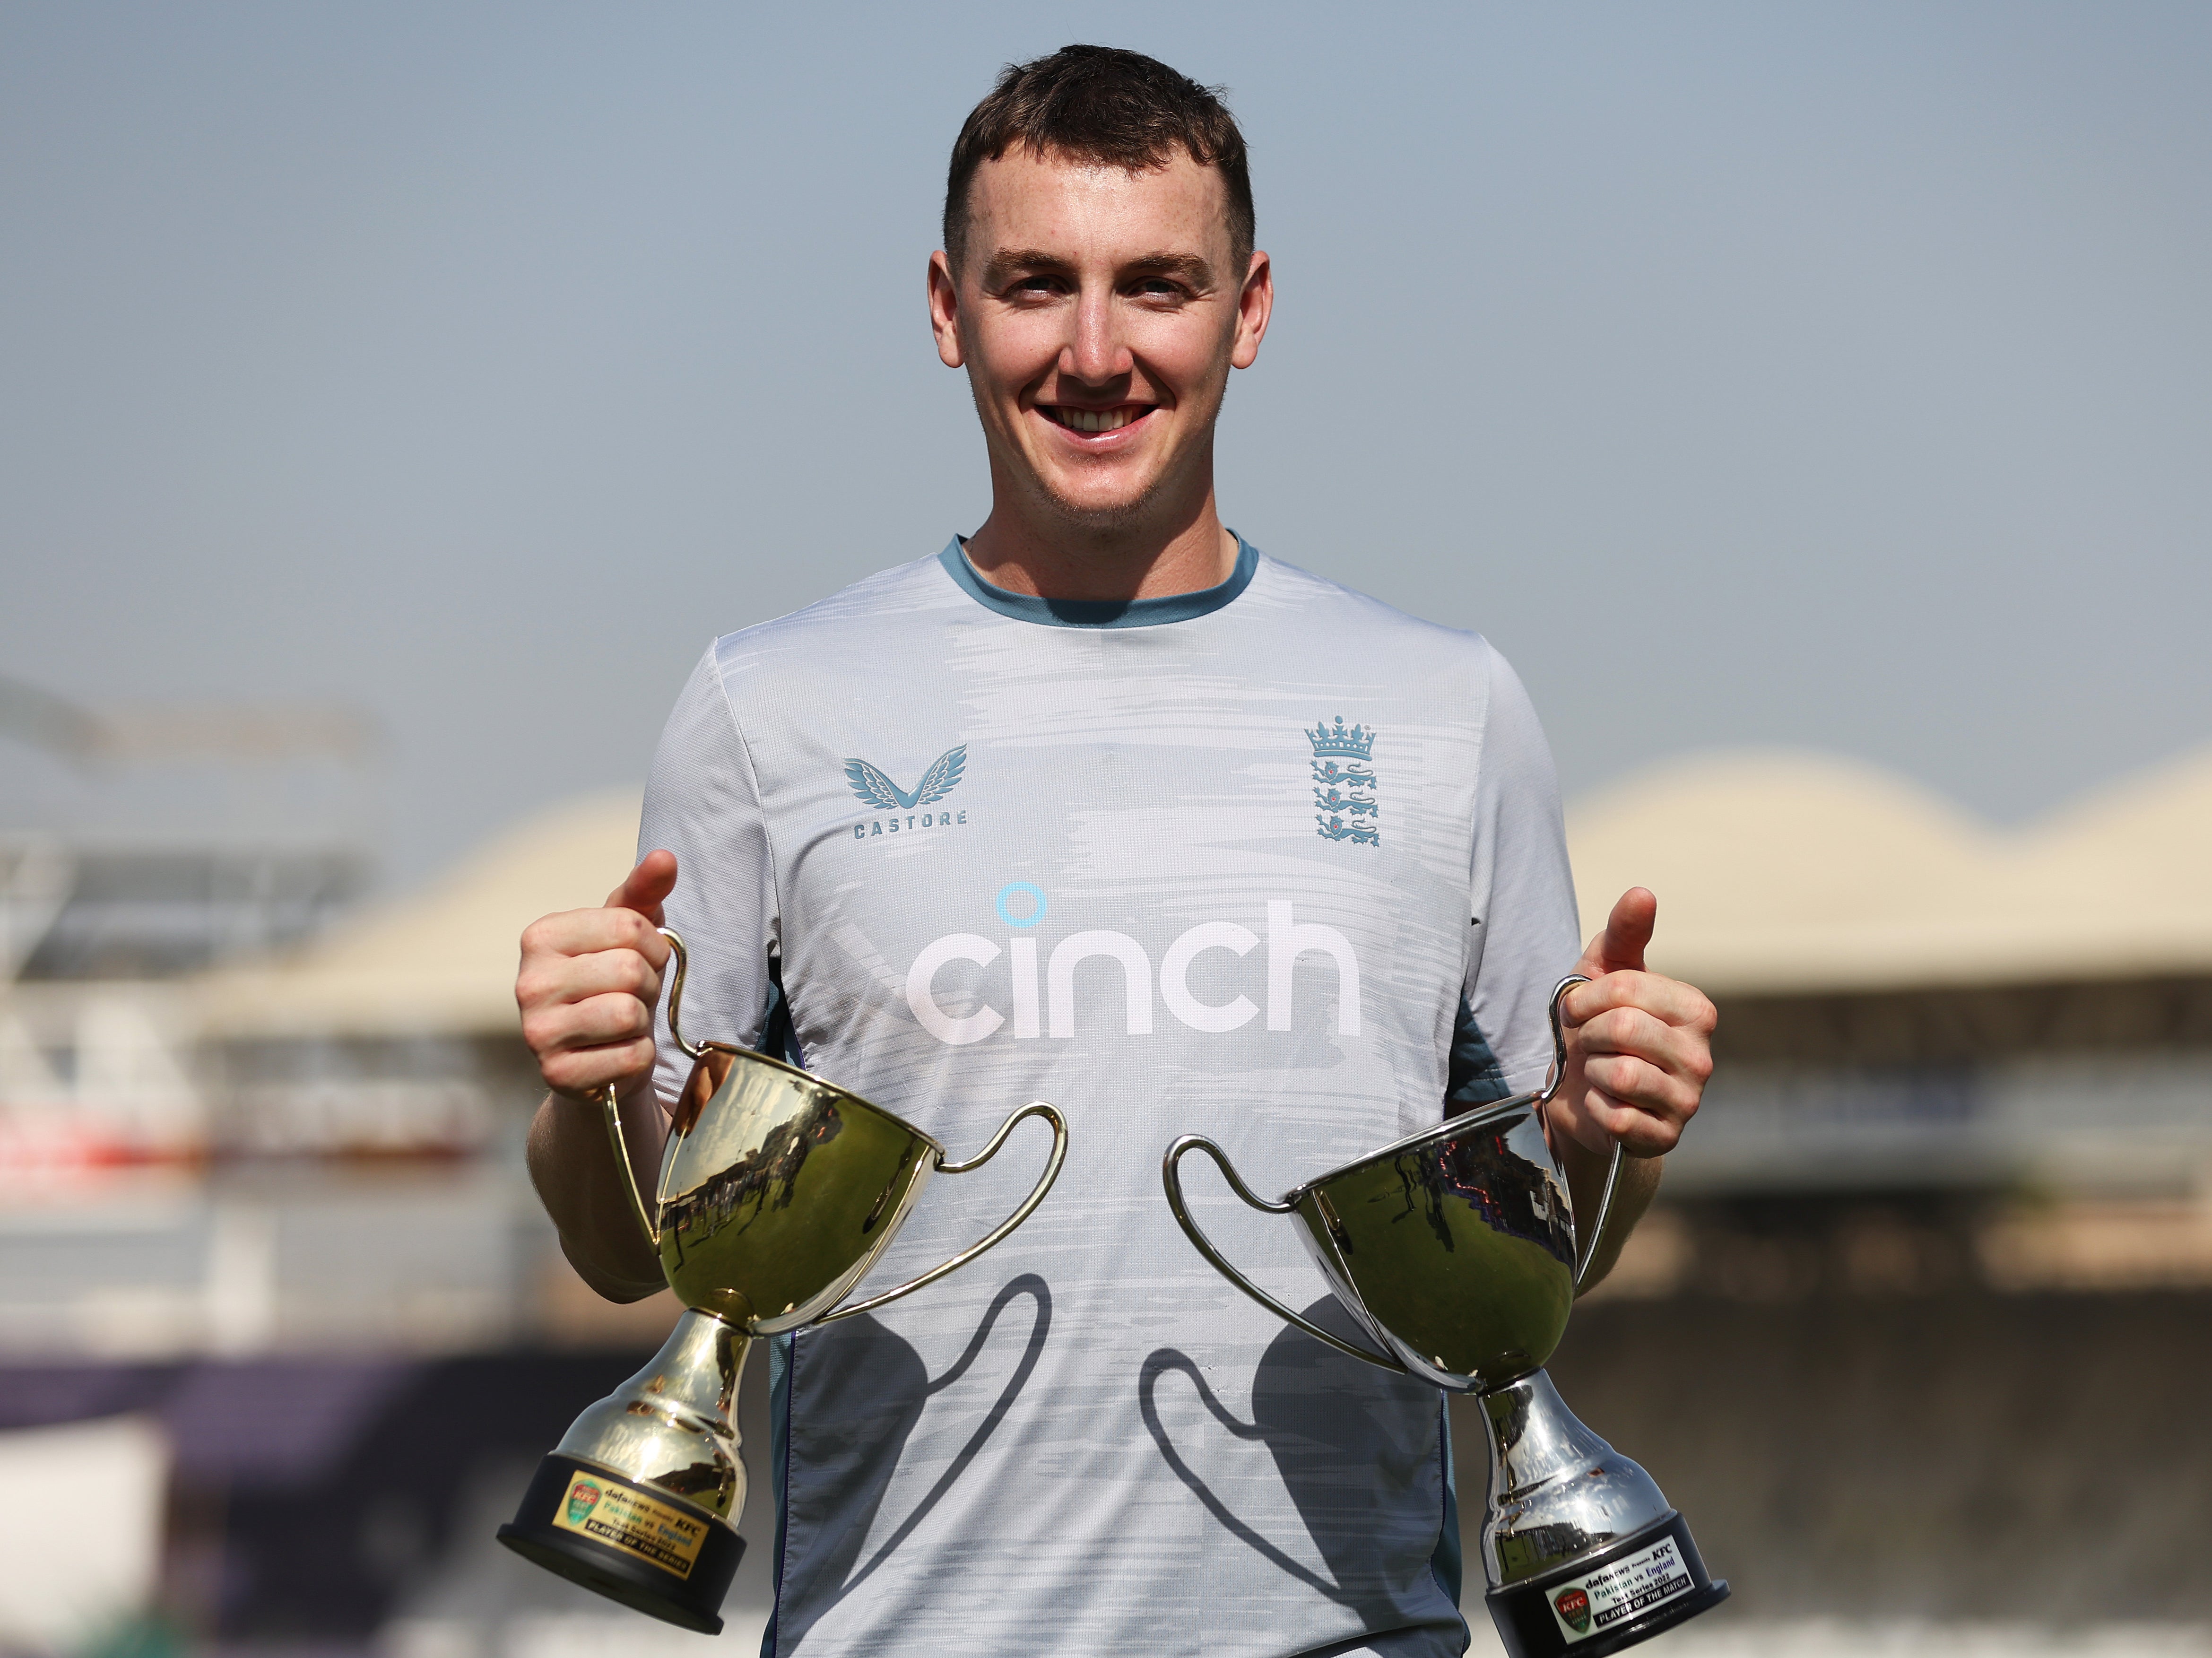 The 23-year-old scored 468 runs at an average of 93.60 during England’s series win